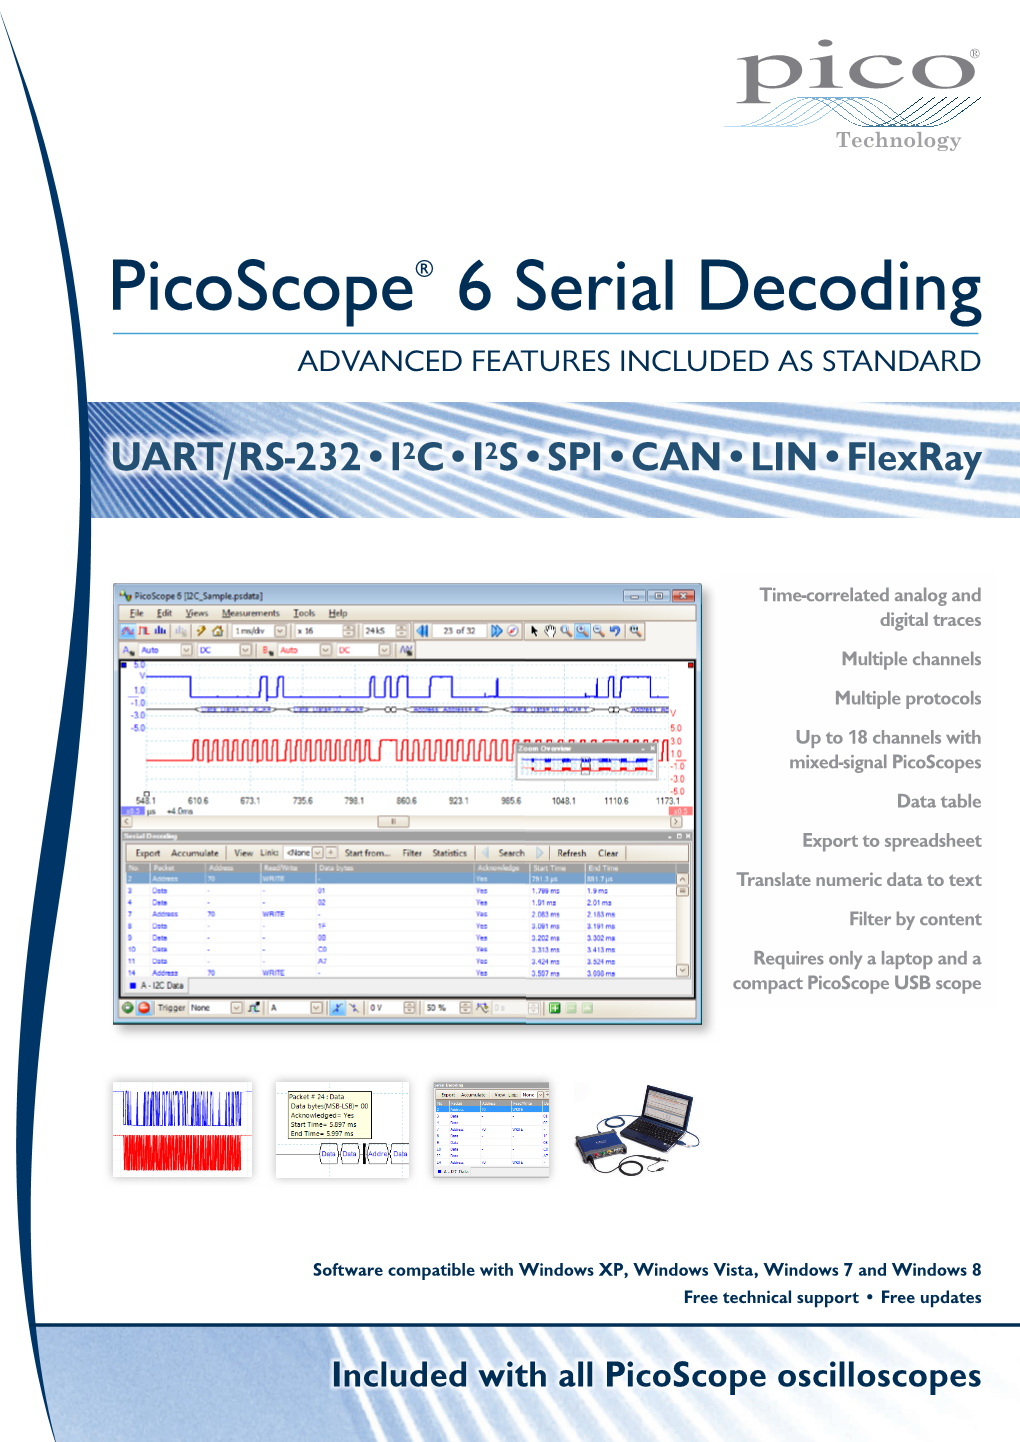 Picoscope® 6 Serial Decoding ADVANCED FEATURES INCLUDED AS STANDARD